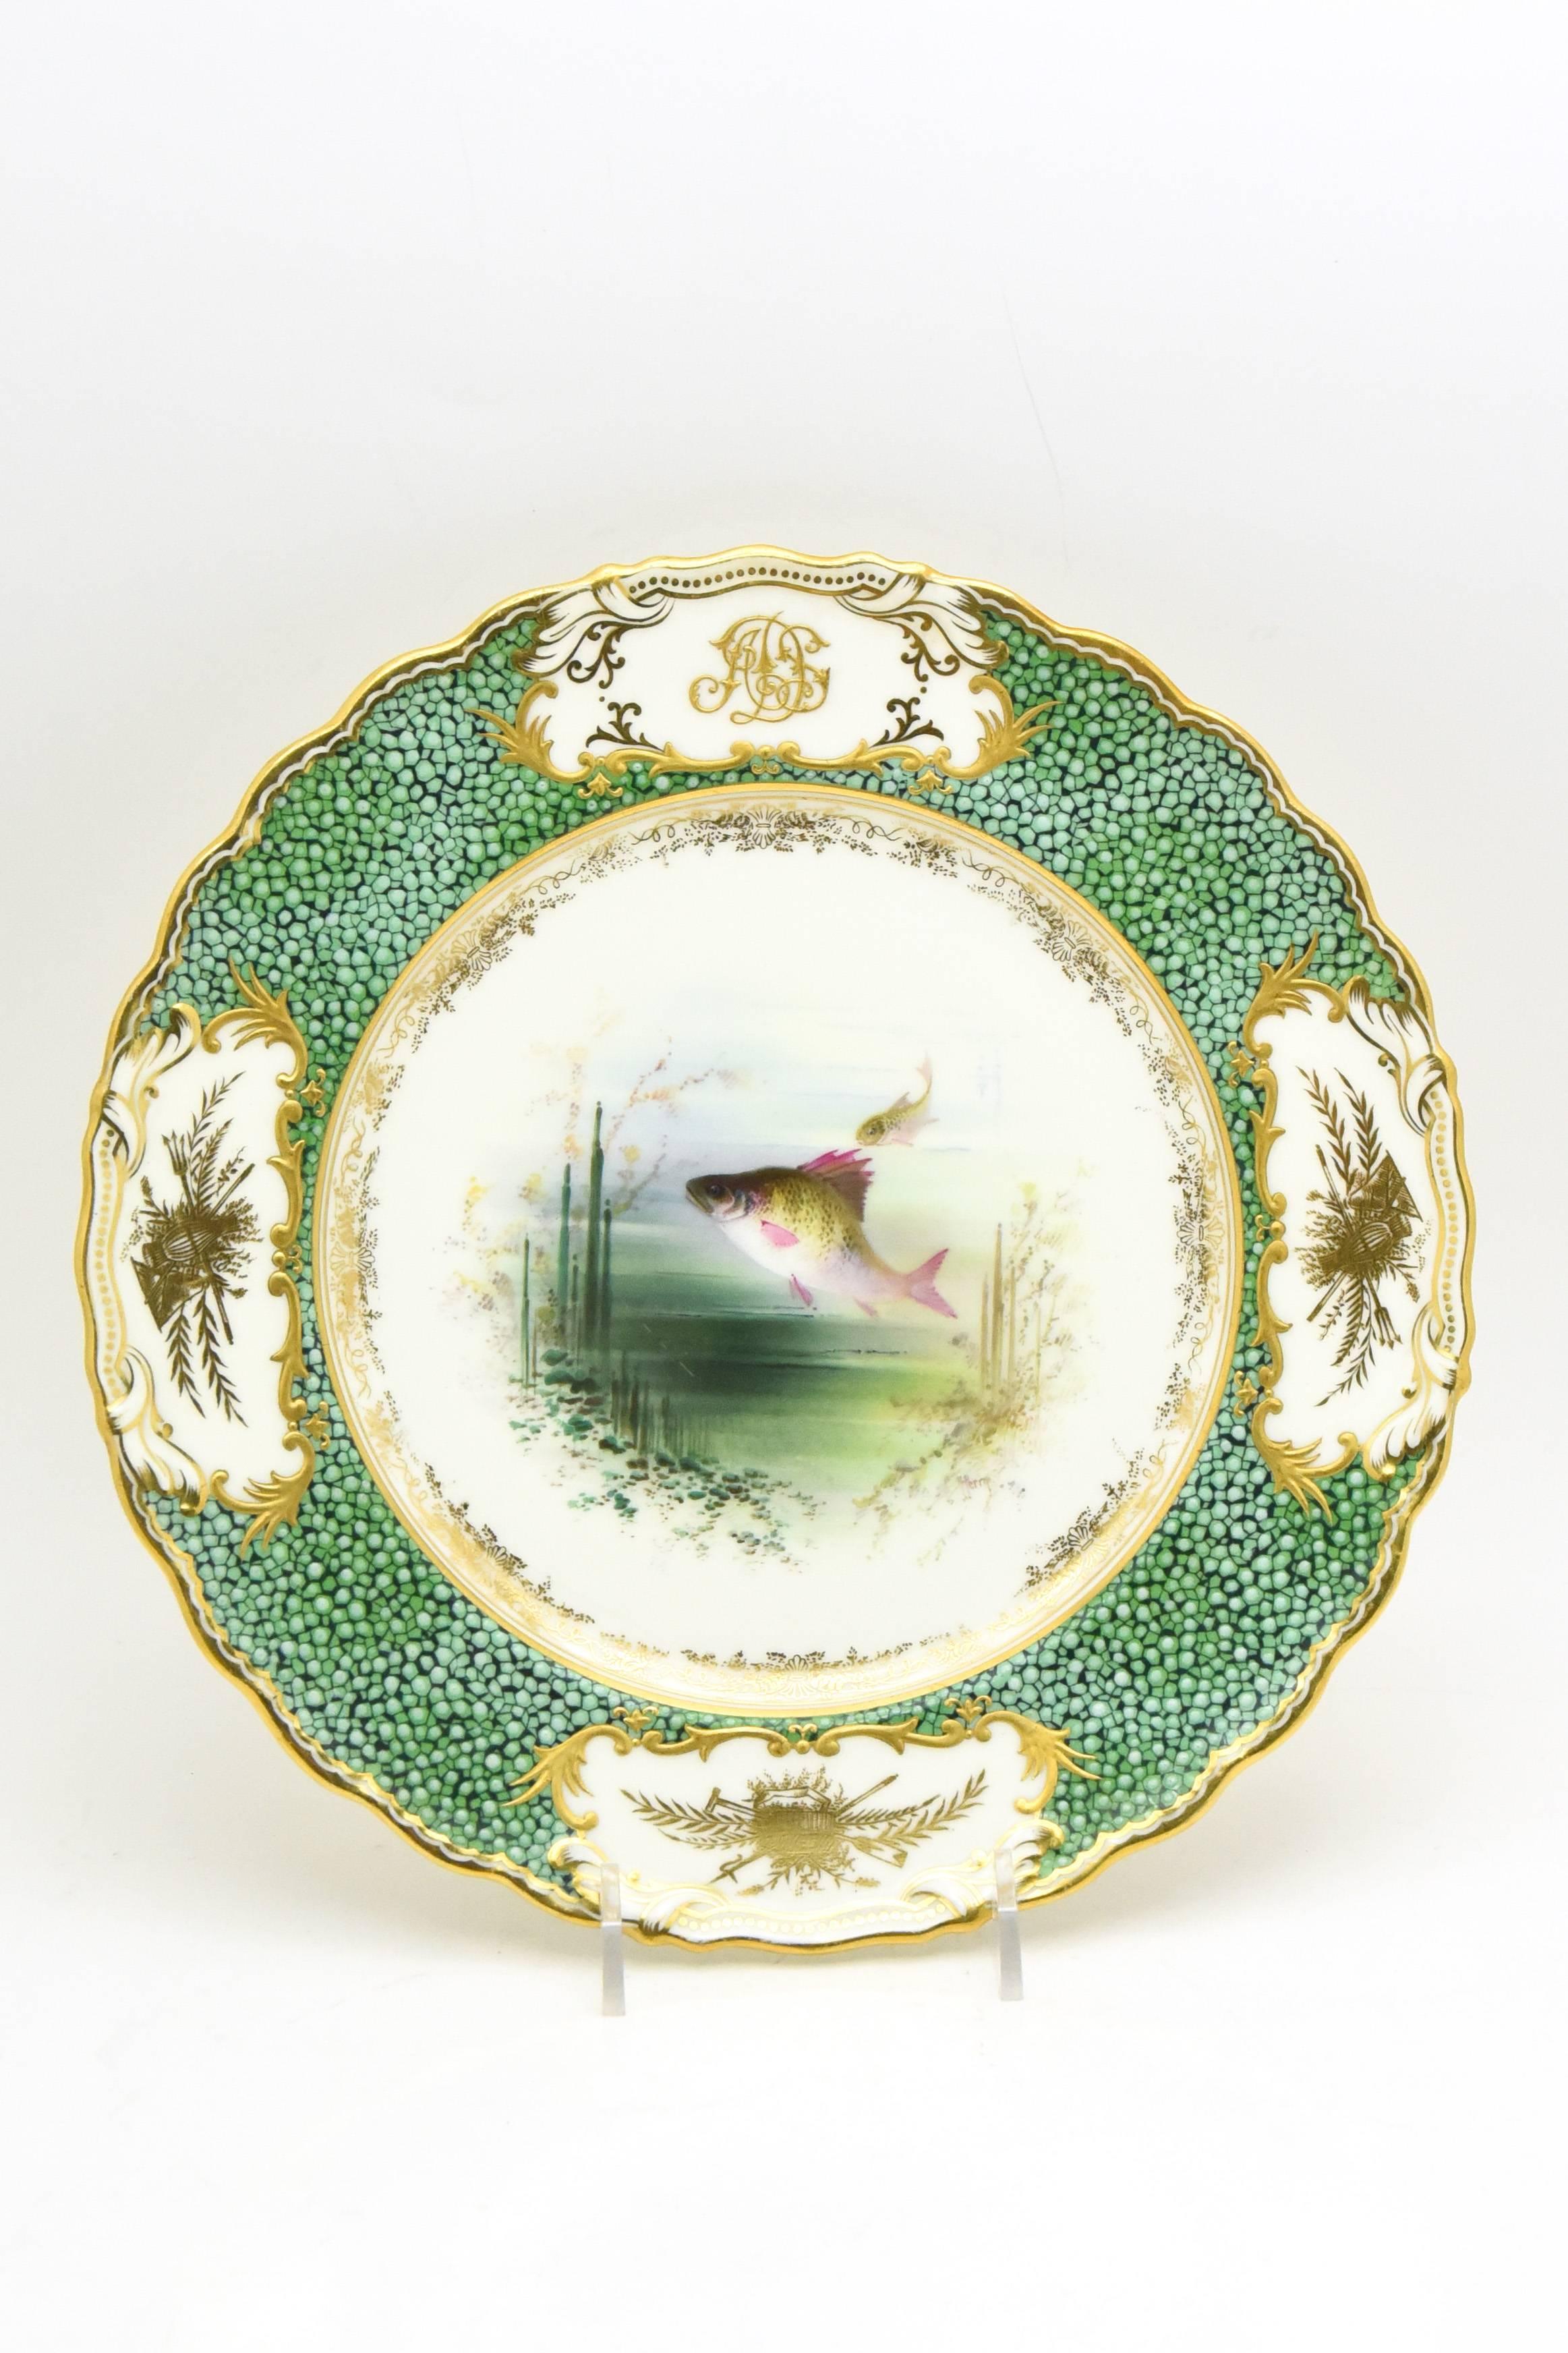 19th Century 18-Piece Coalport Hand-Painted Artist Signed Fish Service with 